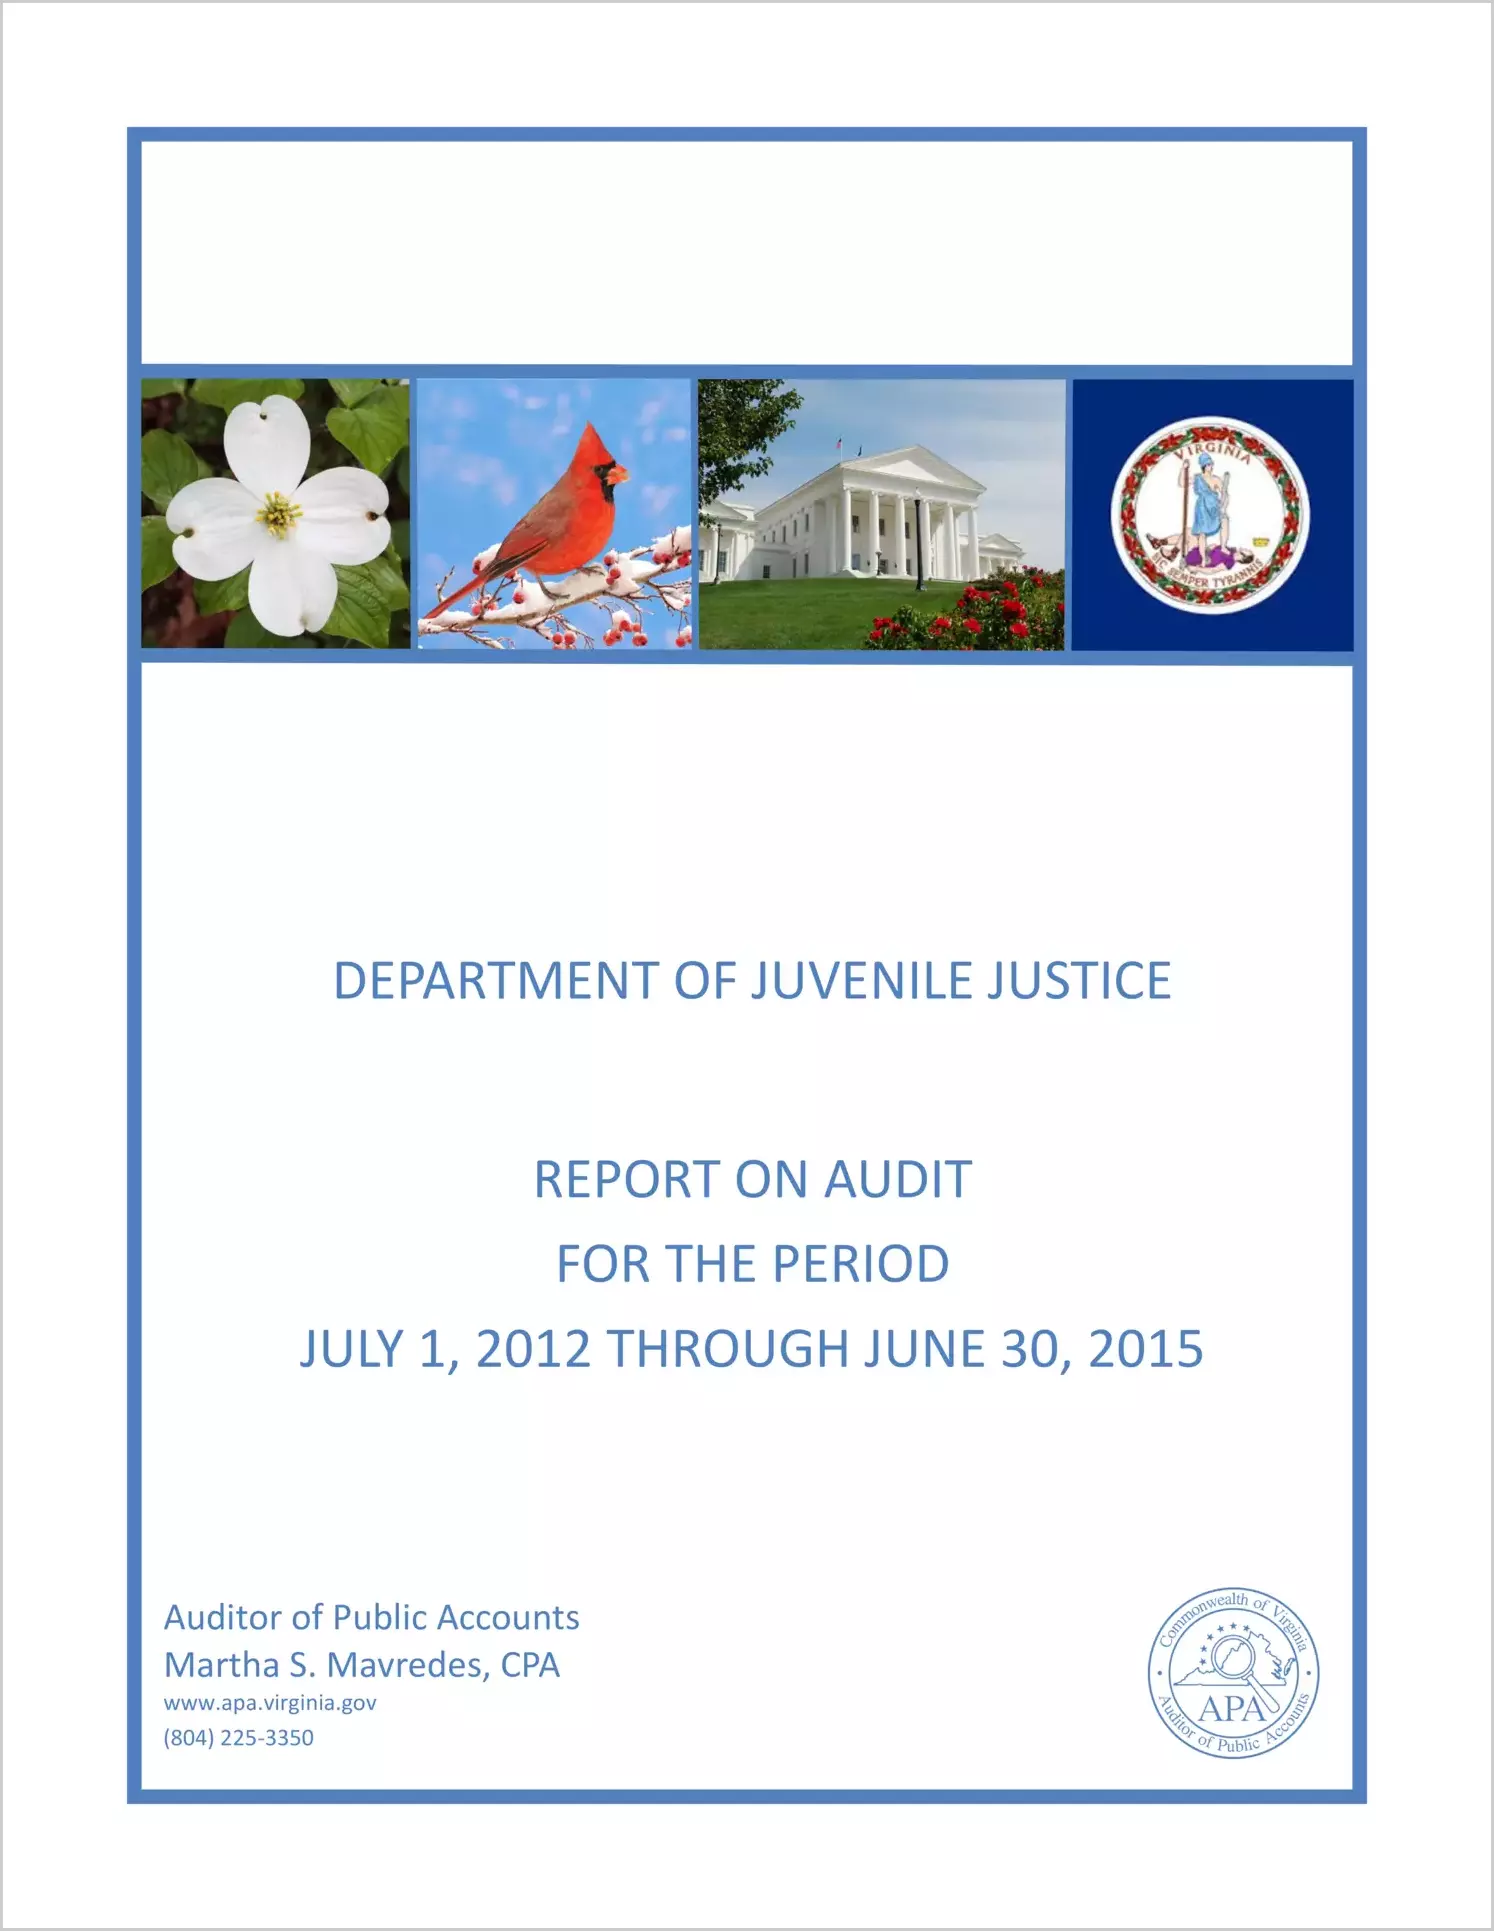 Department of Juvenile Justice for the period July 1, 2012 through June 30, 2015